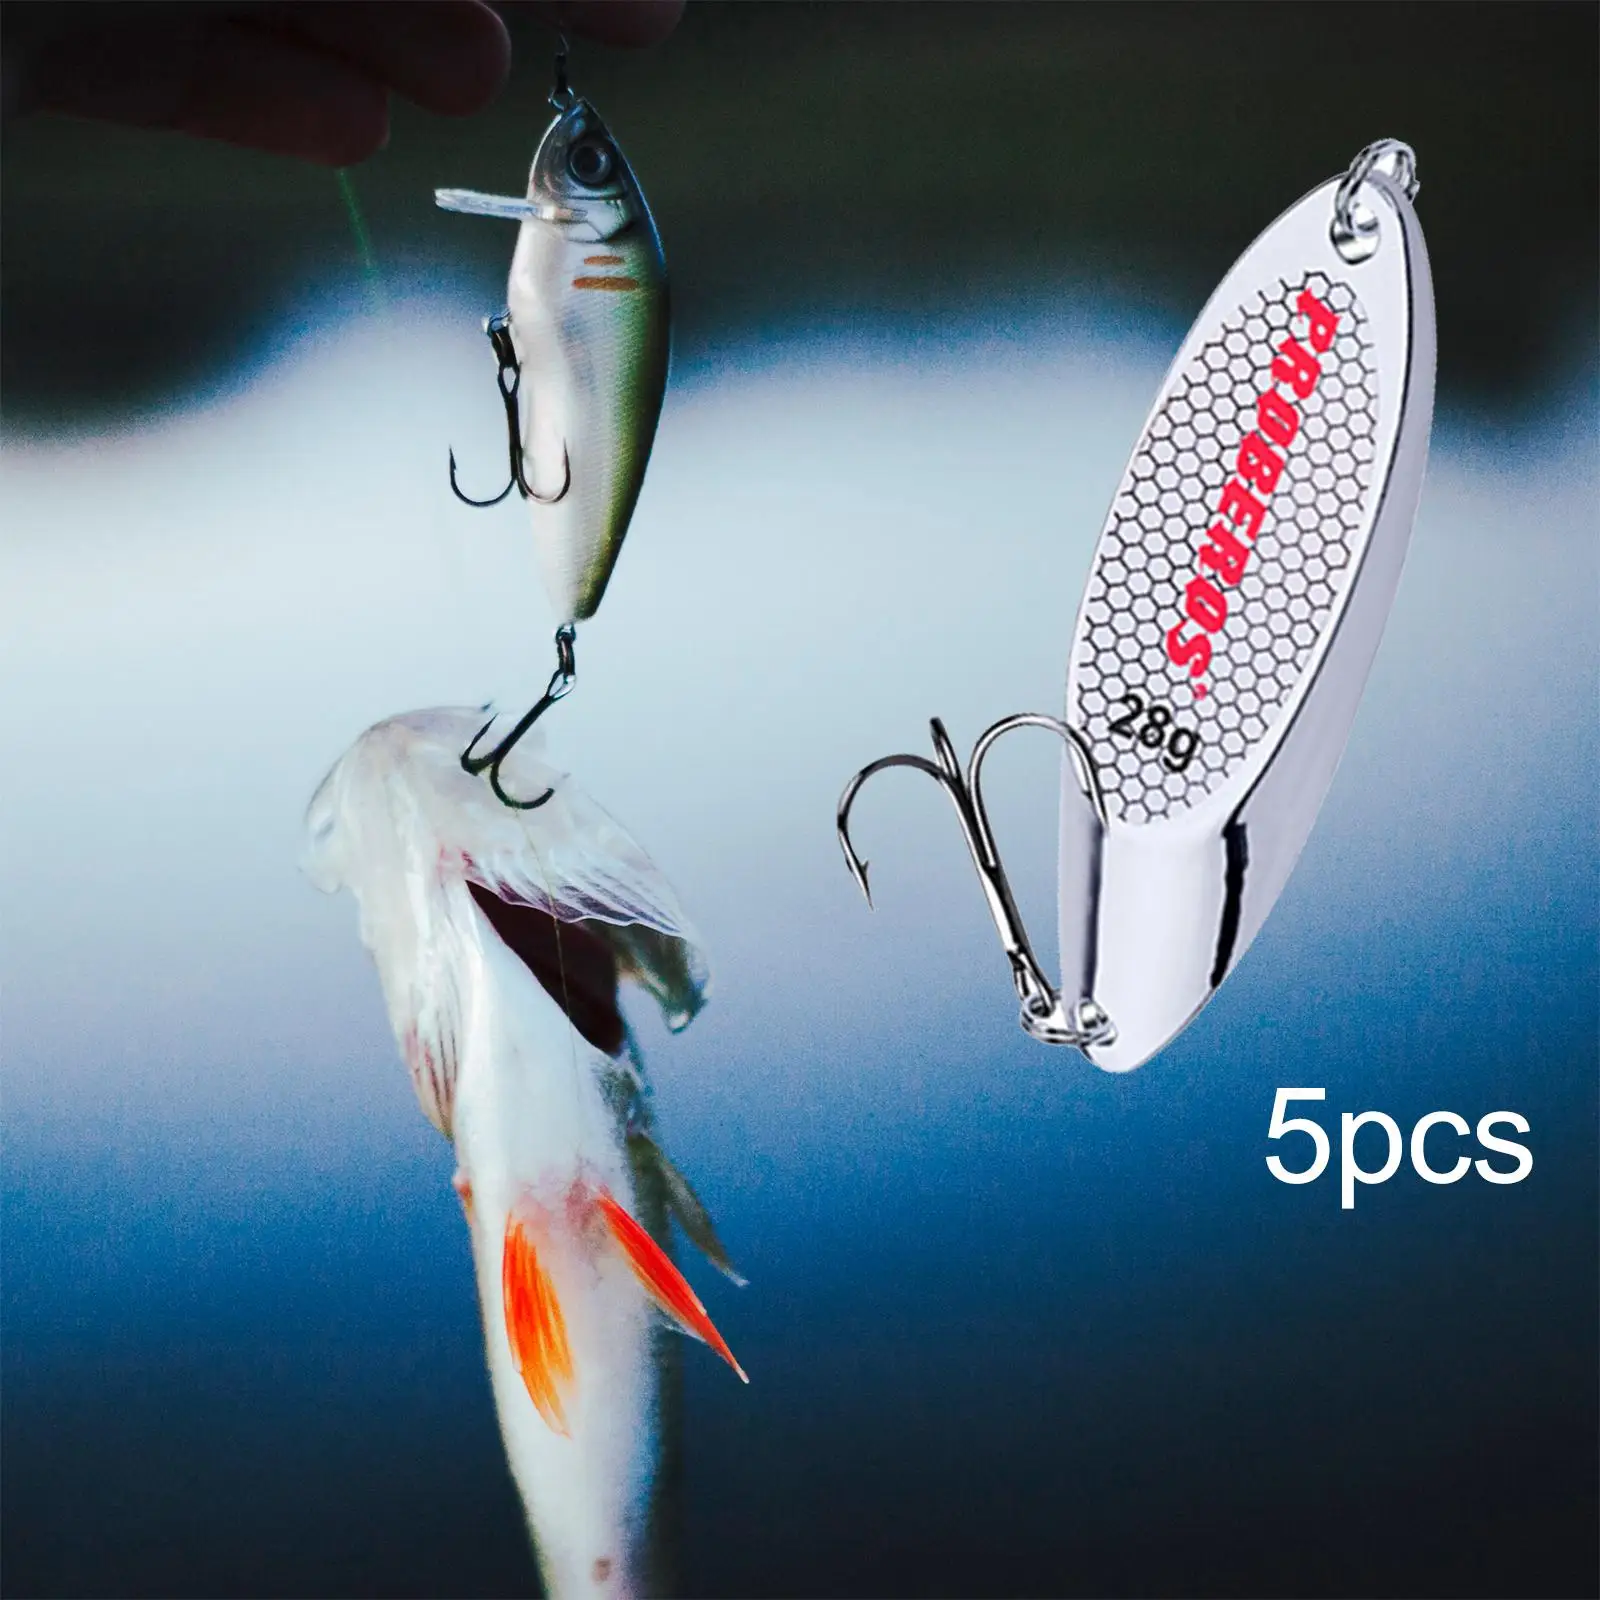 5 Pieces Fishing Spoons Lures for Huge Distance Cast Freshwater Hard Metal Casting Spoons for Bass Pike Trout Catfish Perch